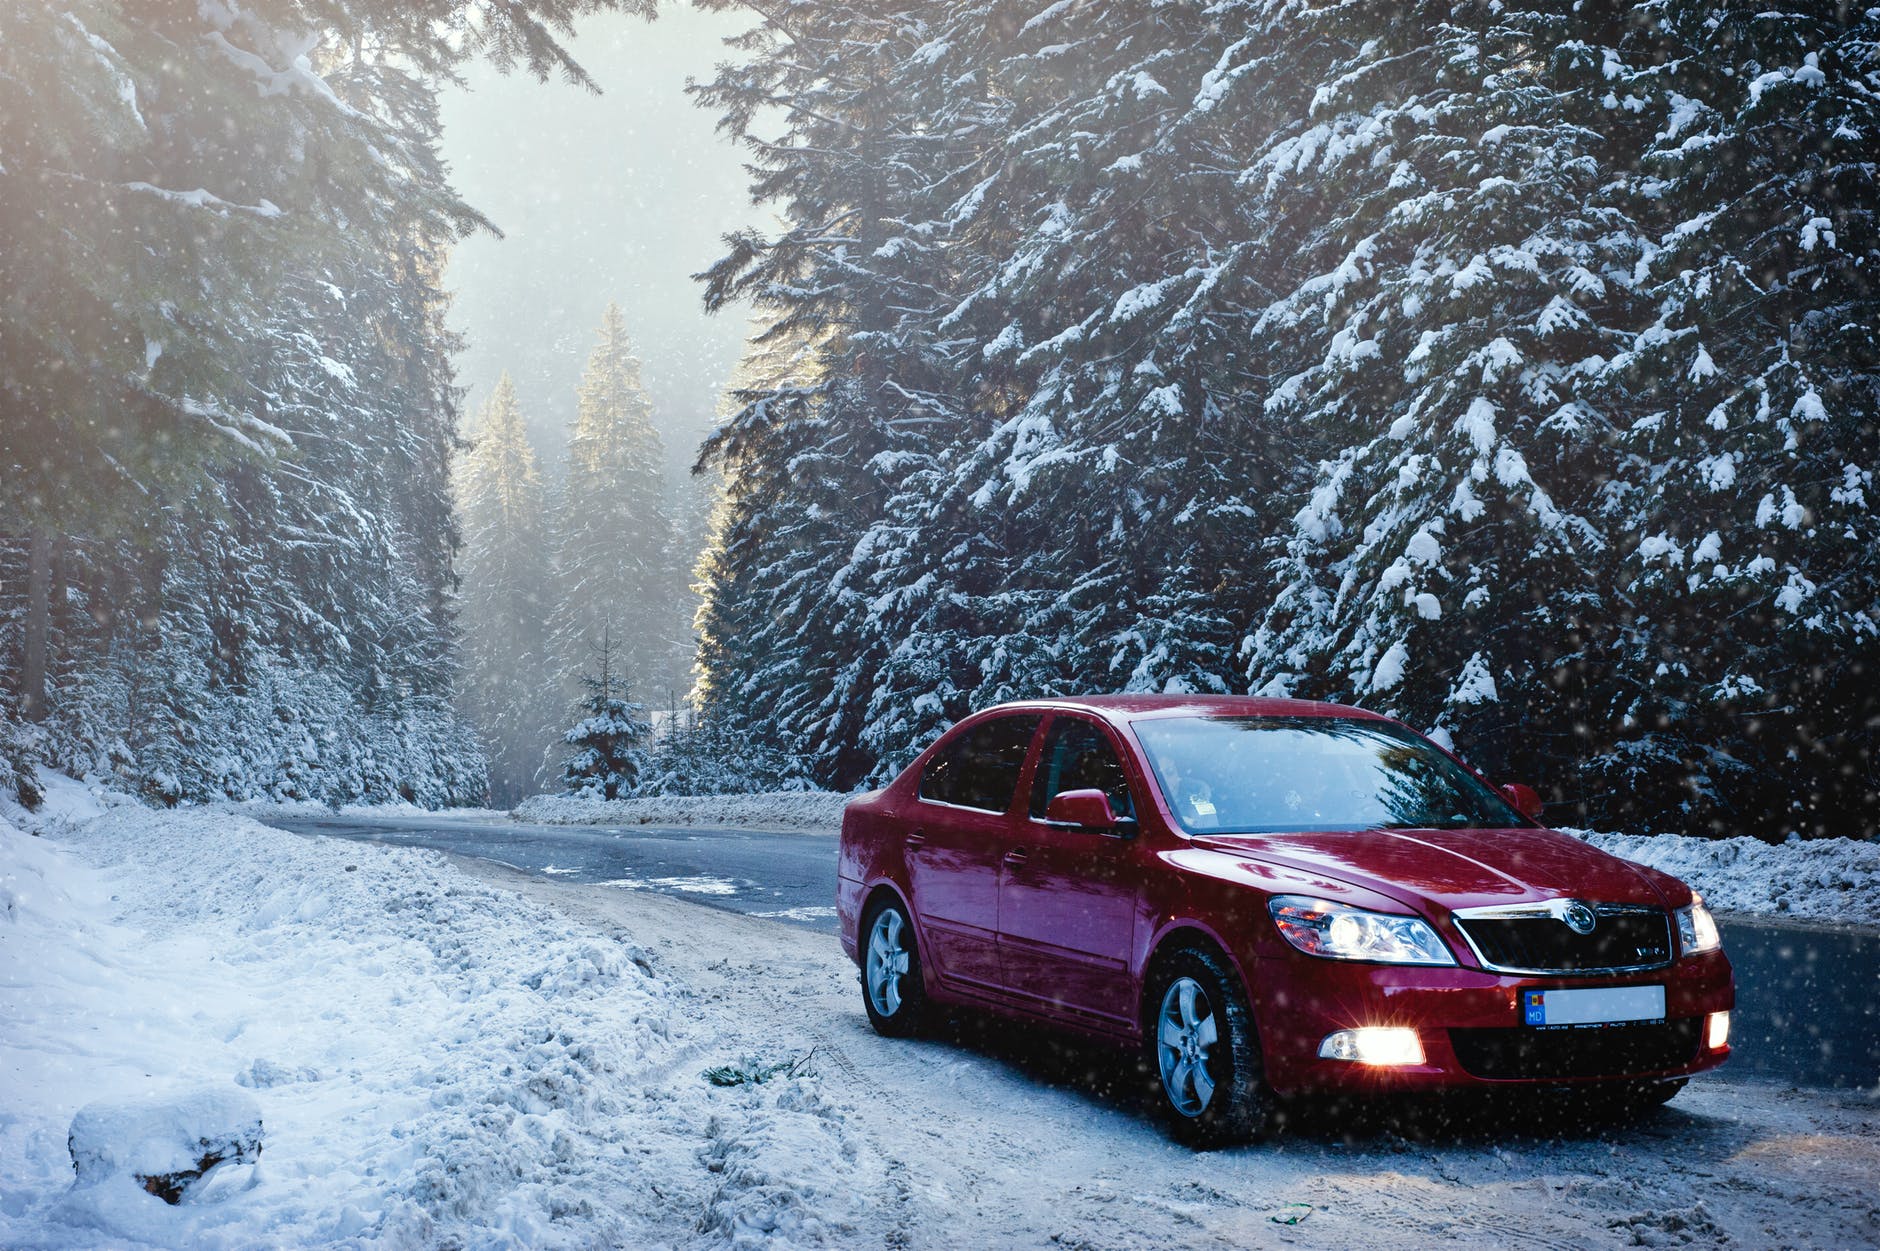 Top Tips for Winter Driving